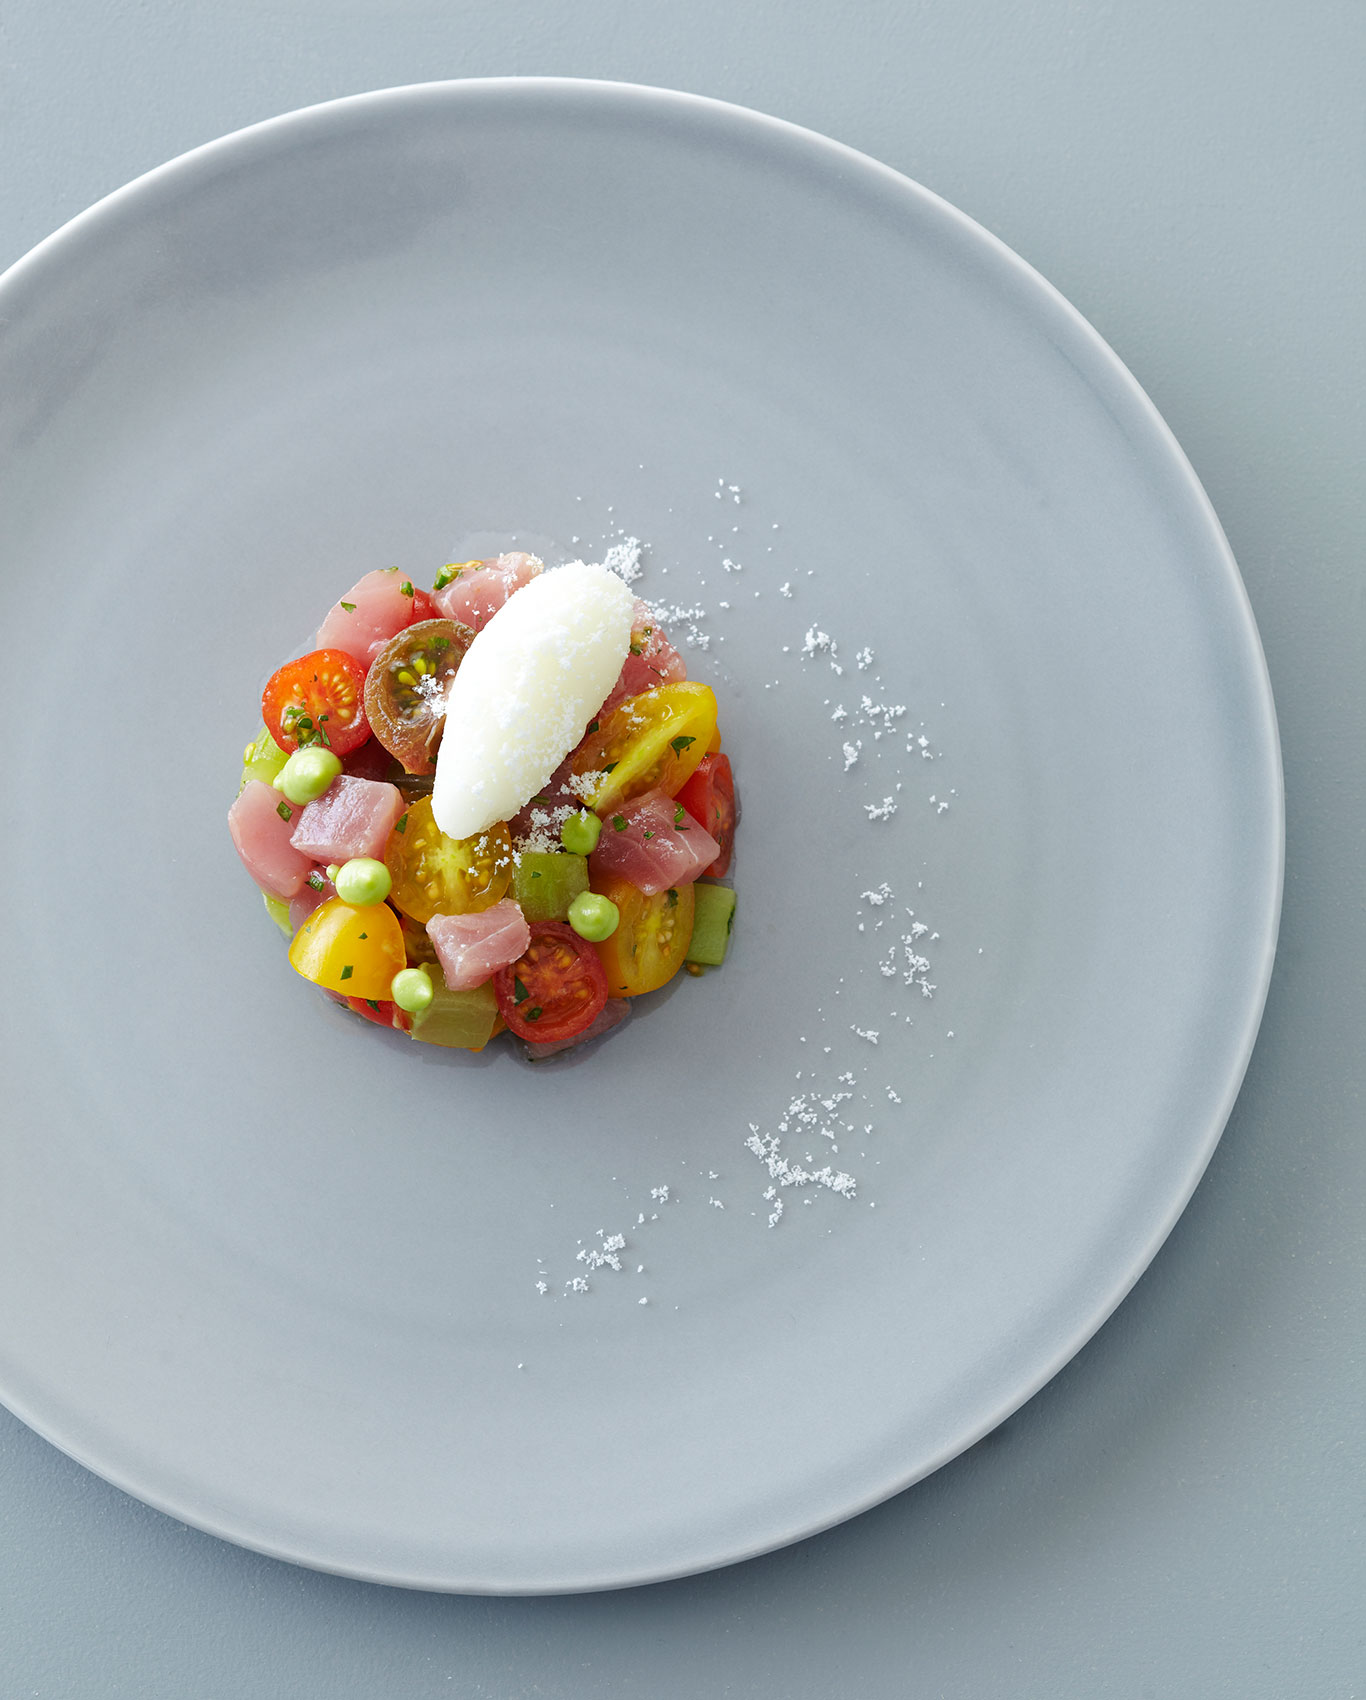 Southon Cooking • The Foodstore Tuna Tartar with Colourful Cherry Tomatoes & Salt • Hospitality & Editorial Food Photography